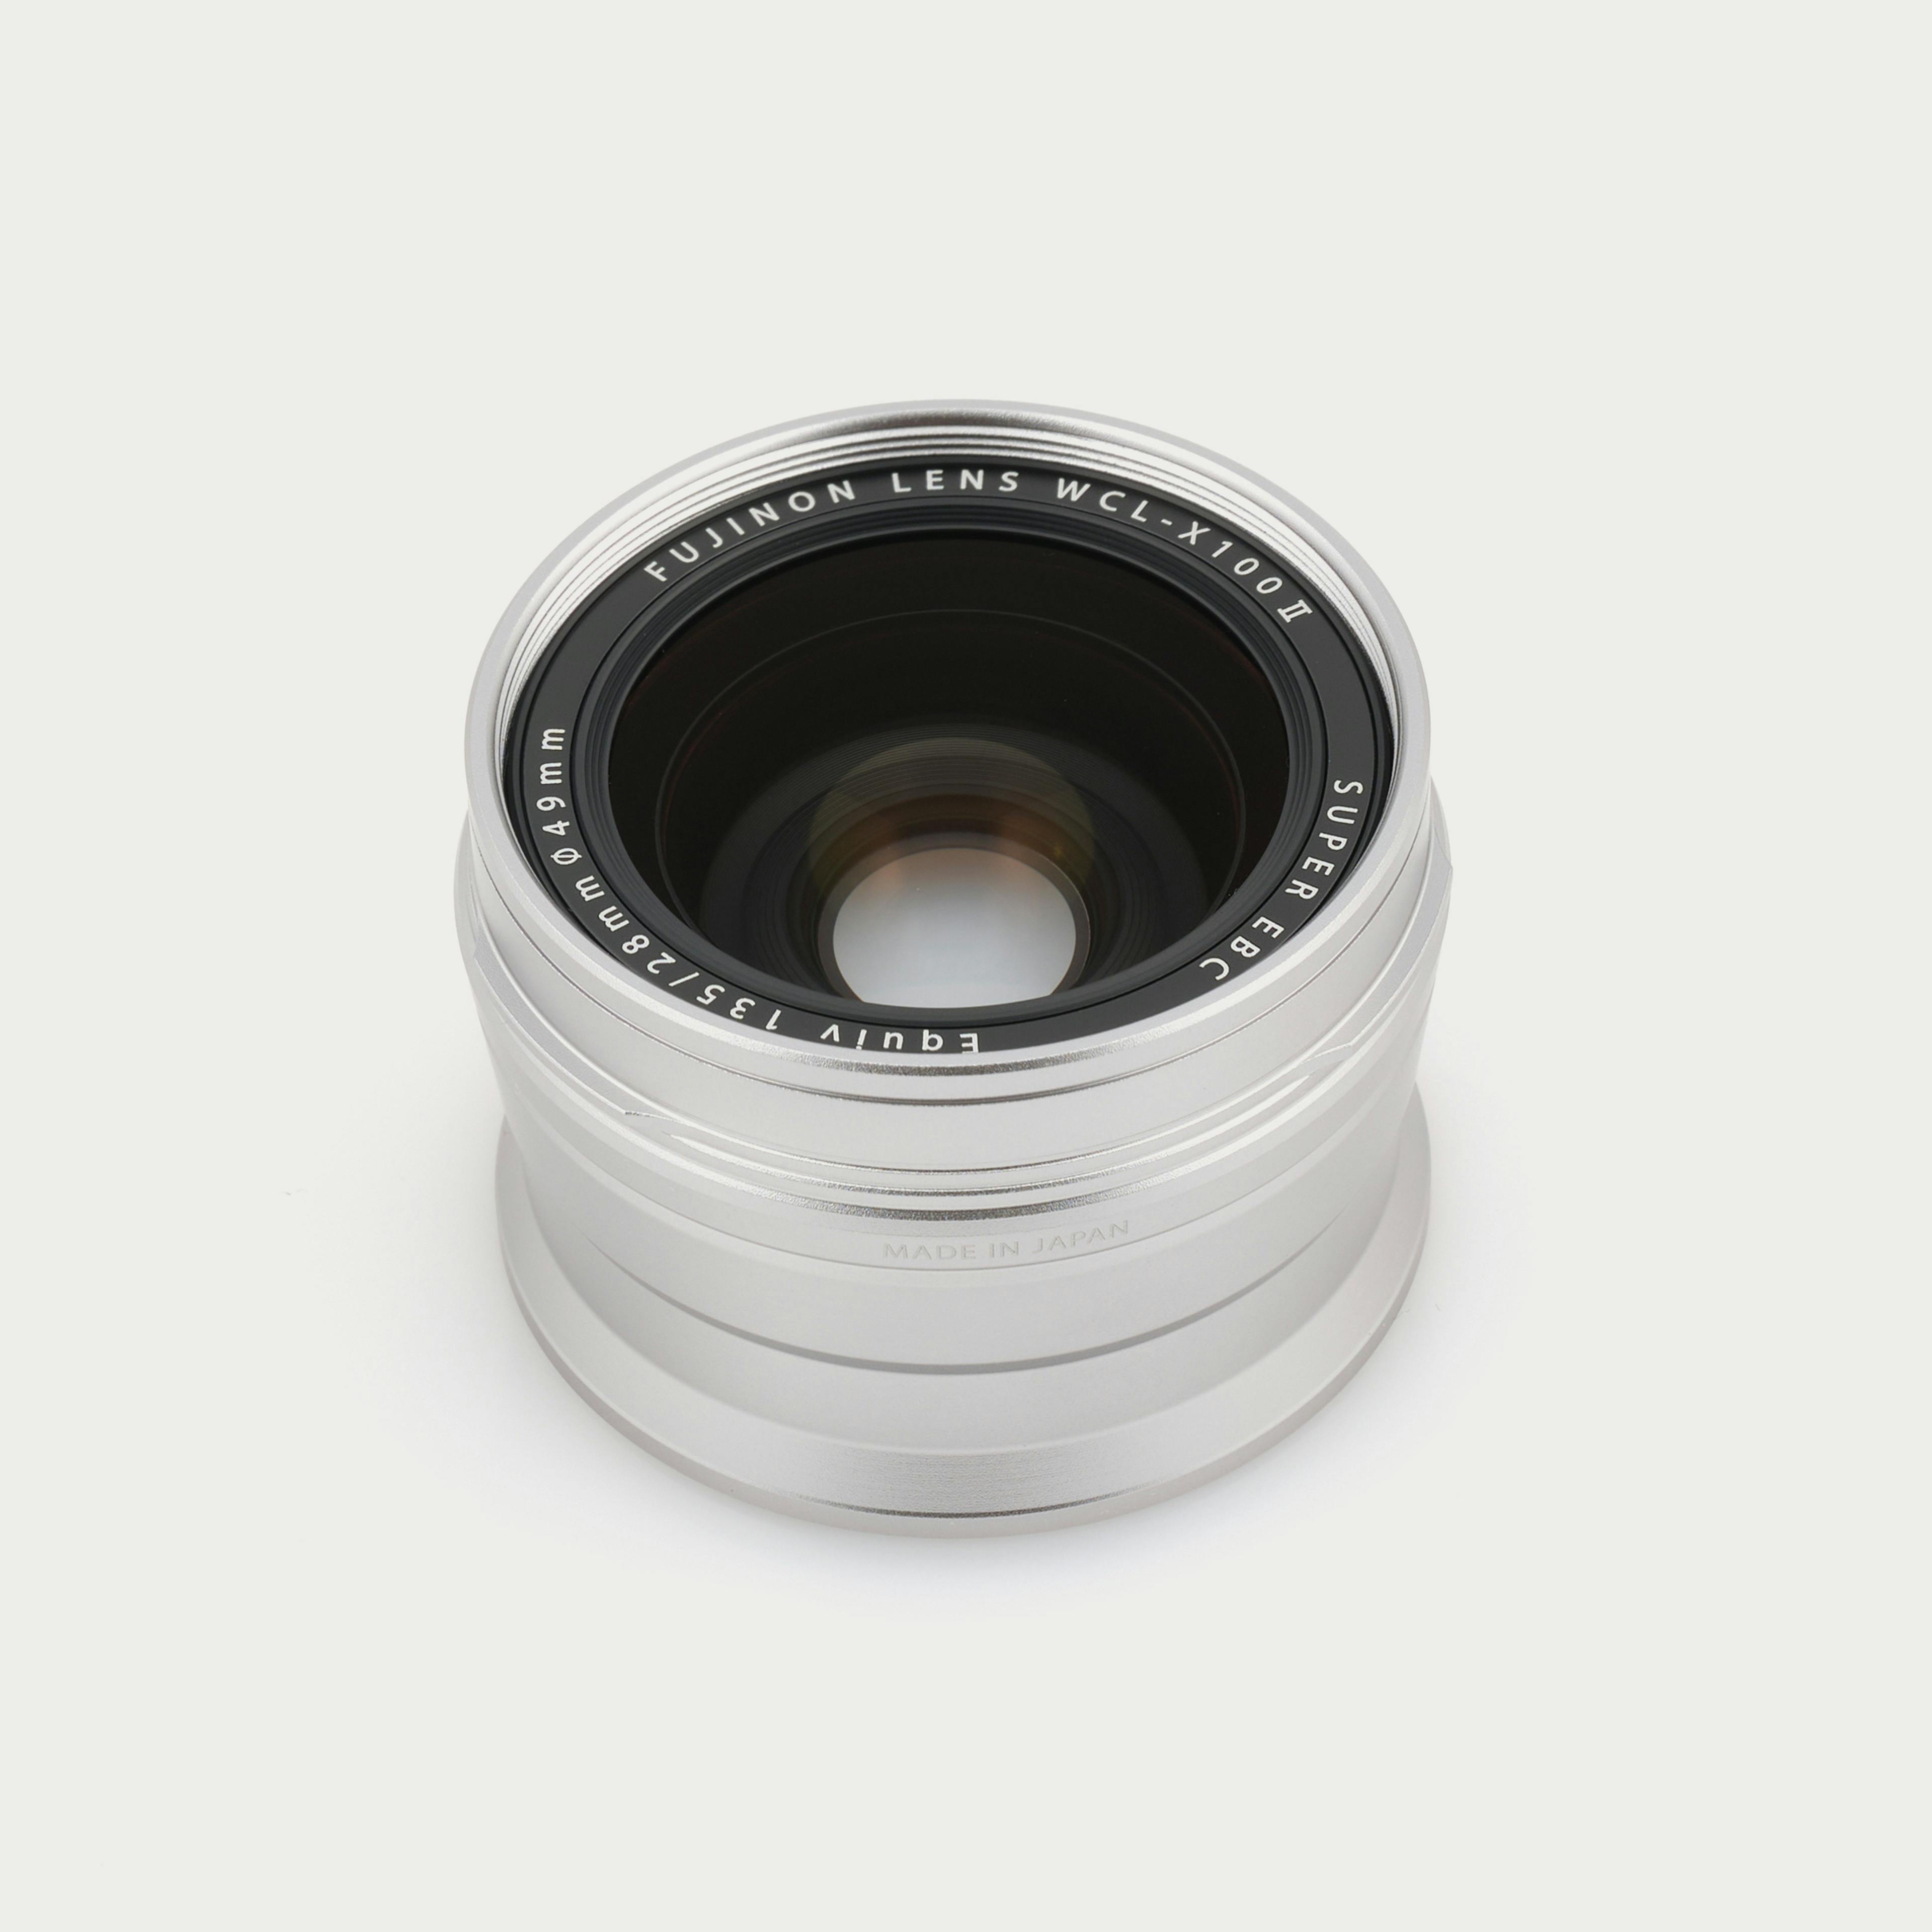 WCL-X100 II Wide Conversion Lens - Silver